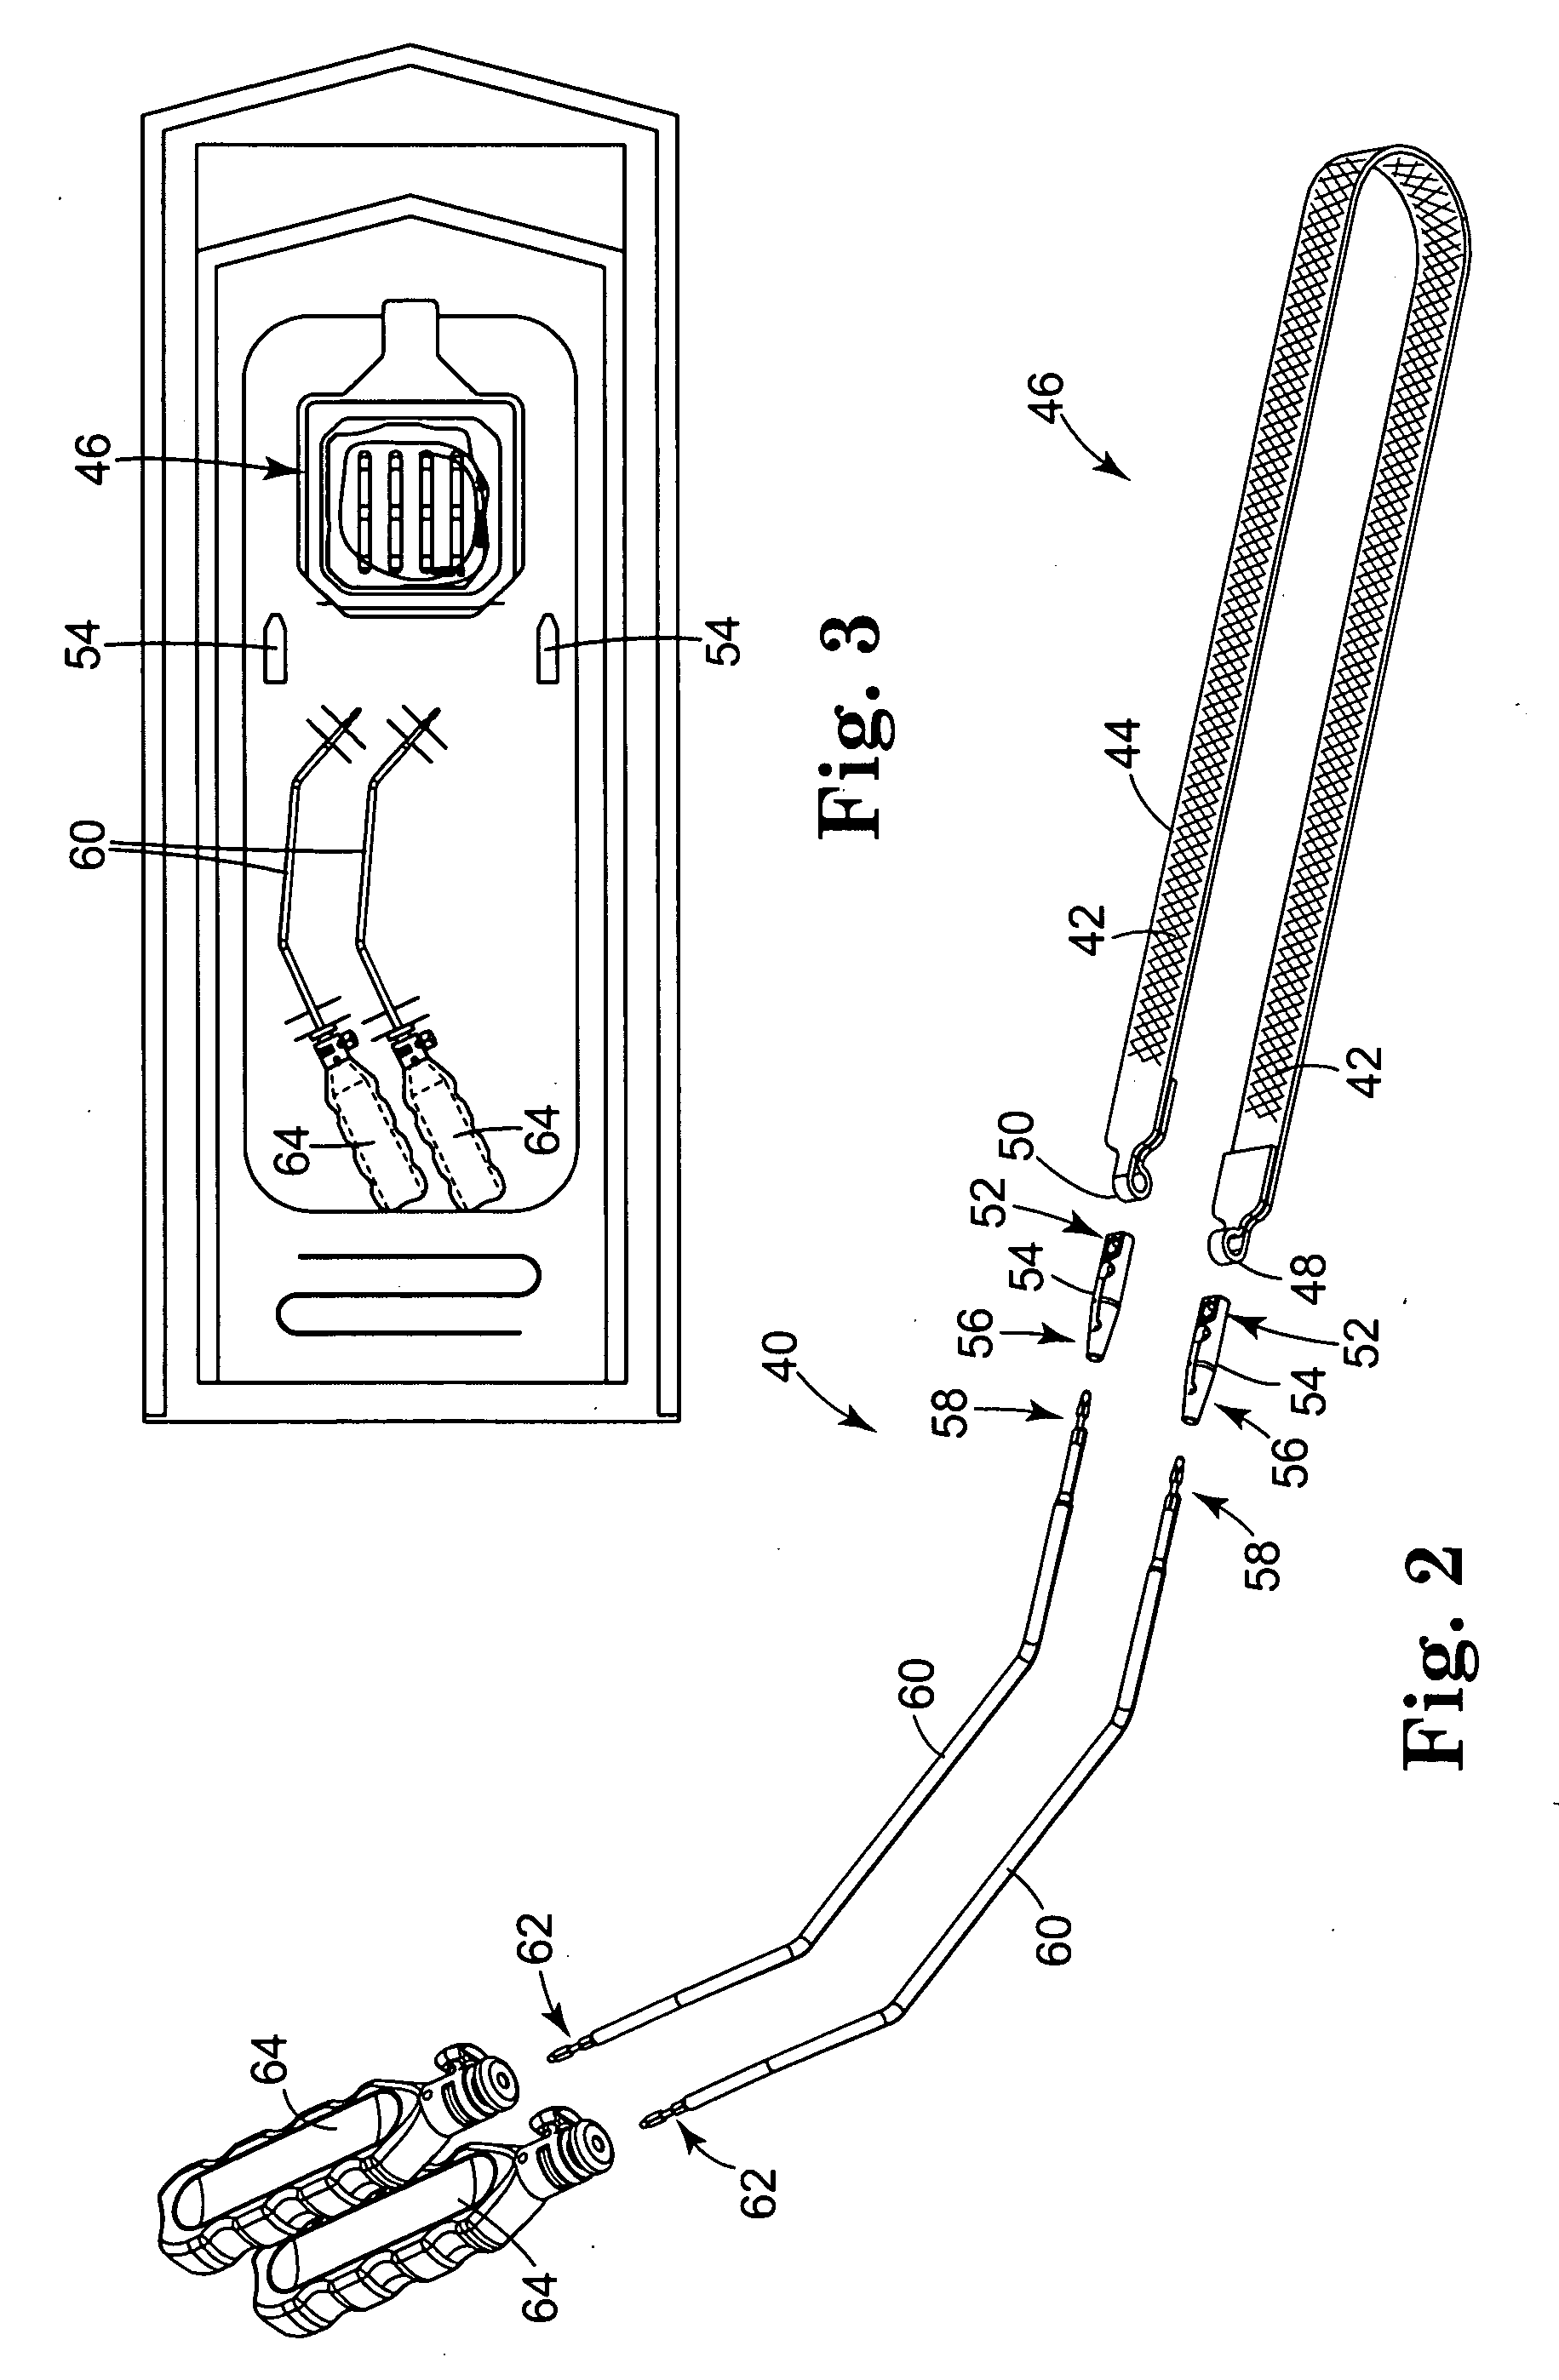 Transobturator surgical articles and methods